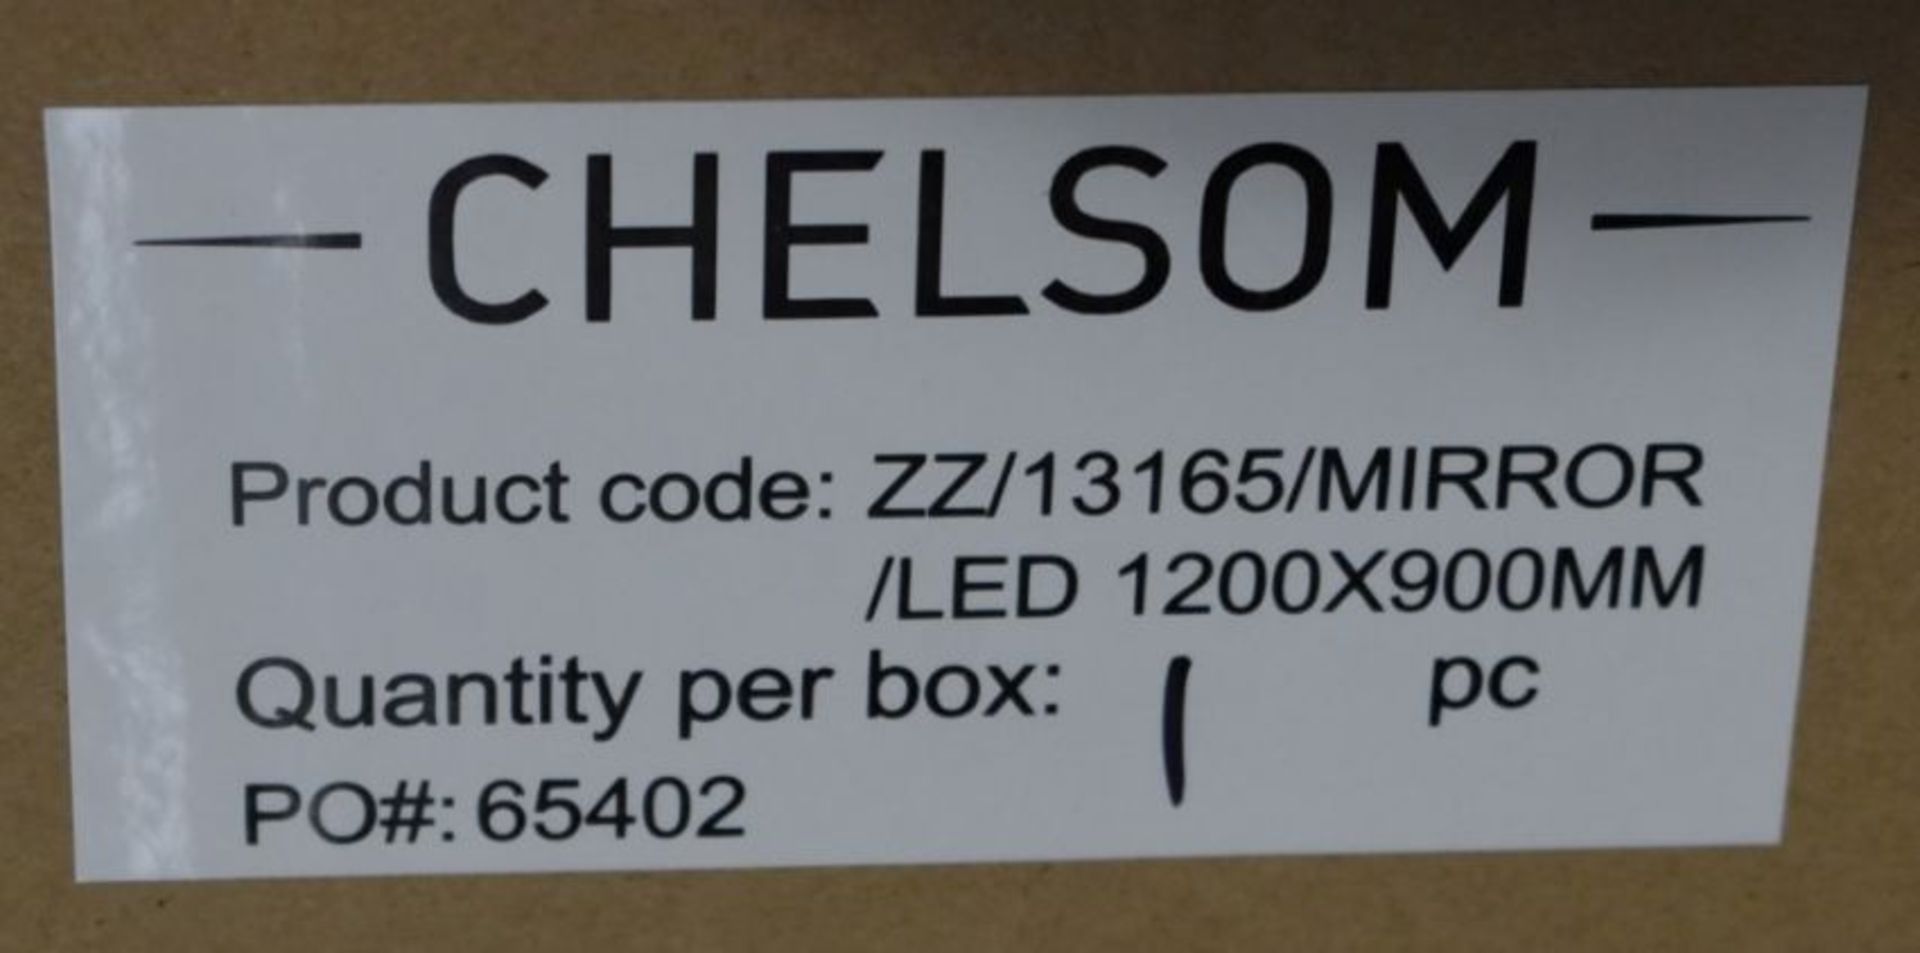 1 x Chelsom Large Illuminated LED Bathroom Mirror With Demister - Brand New Stock - As Used in Major - Image 10 of 11